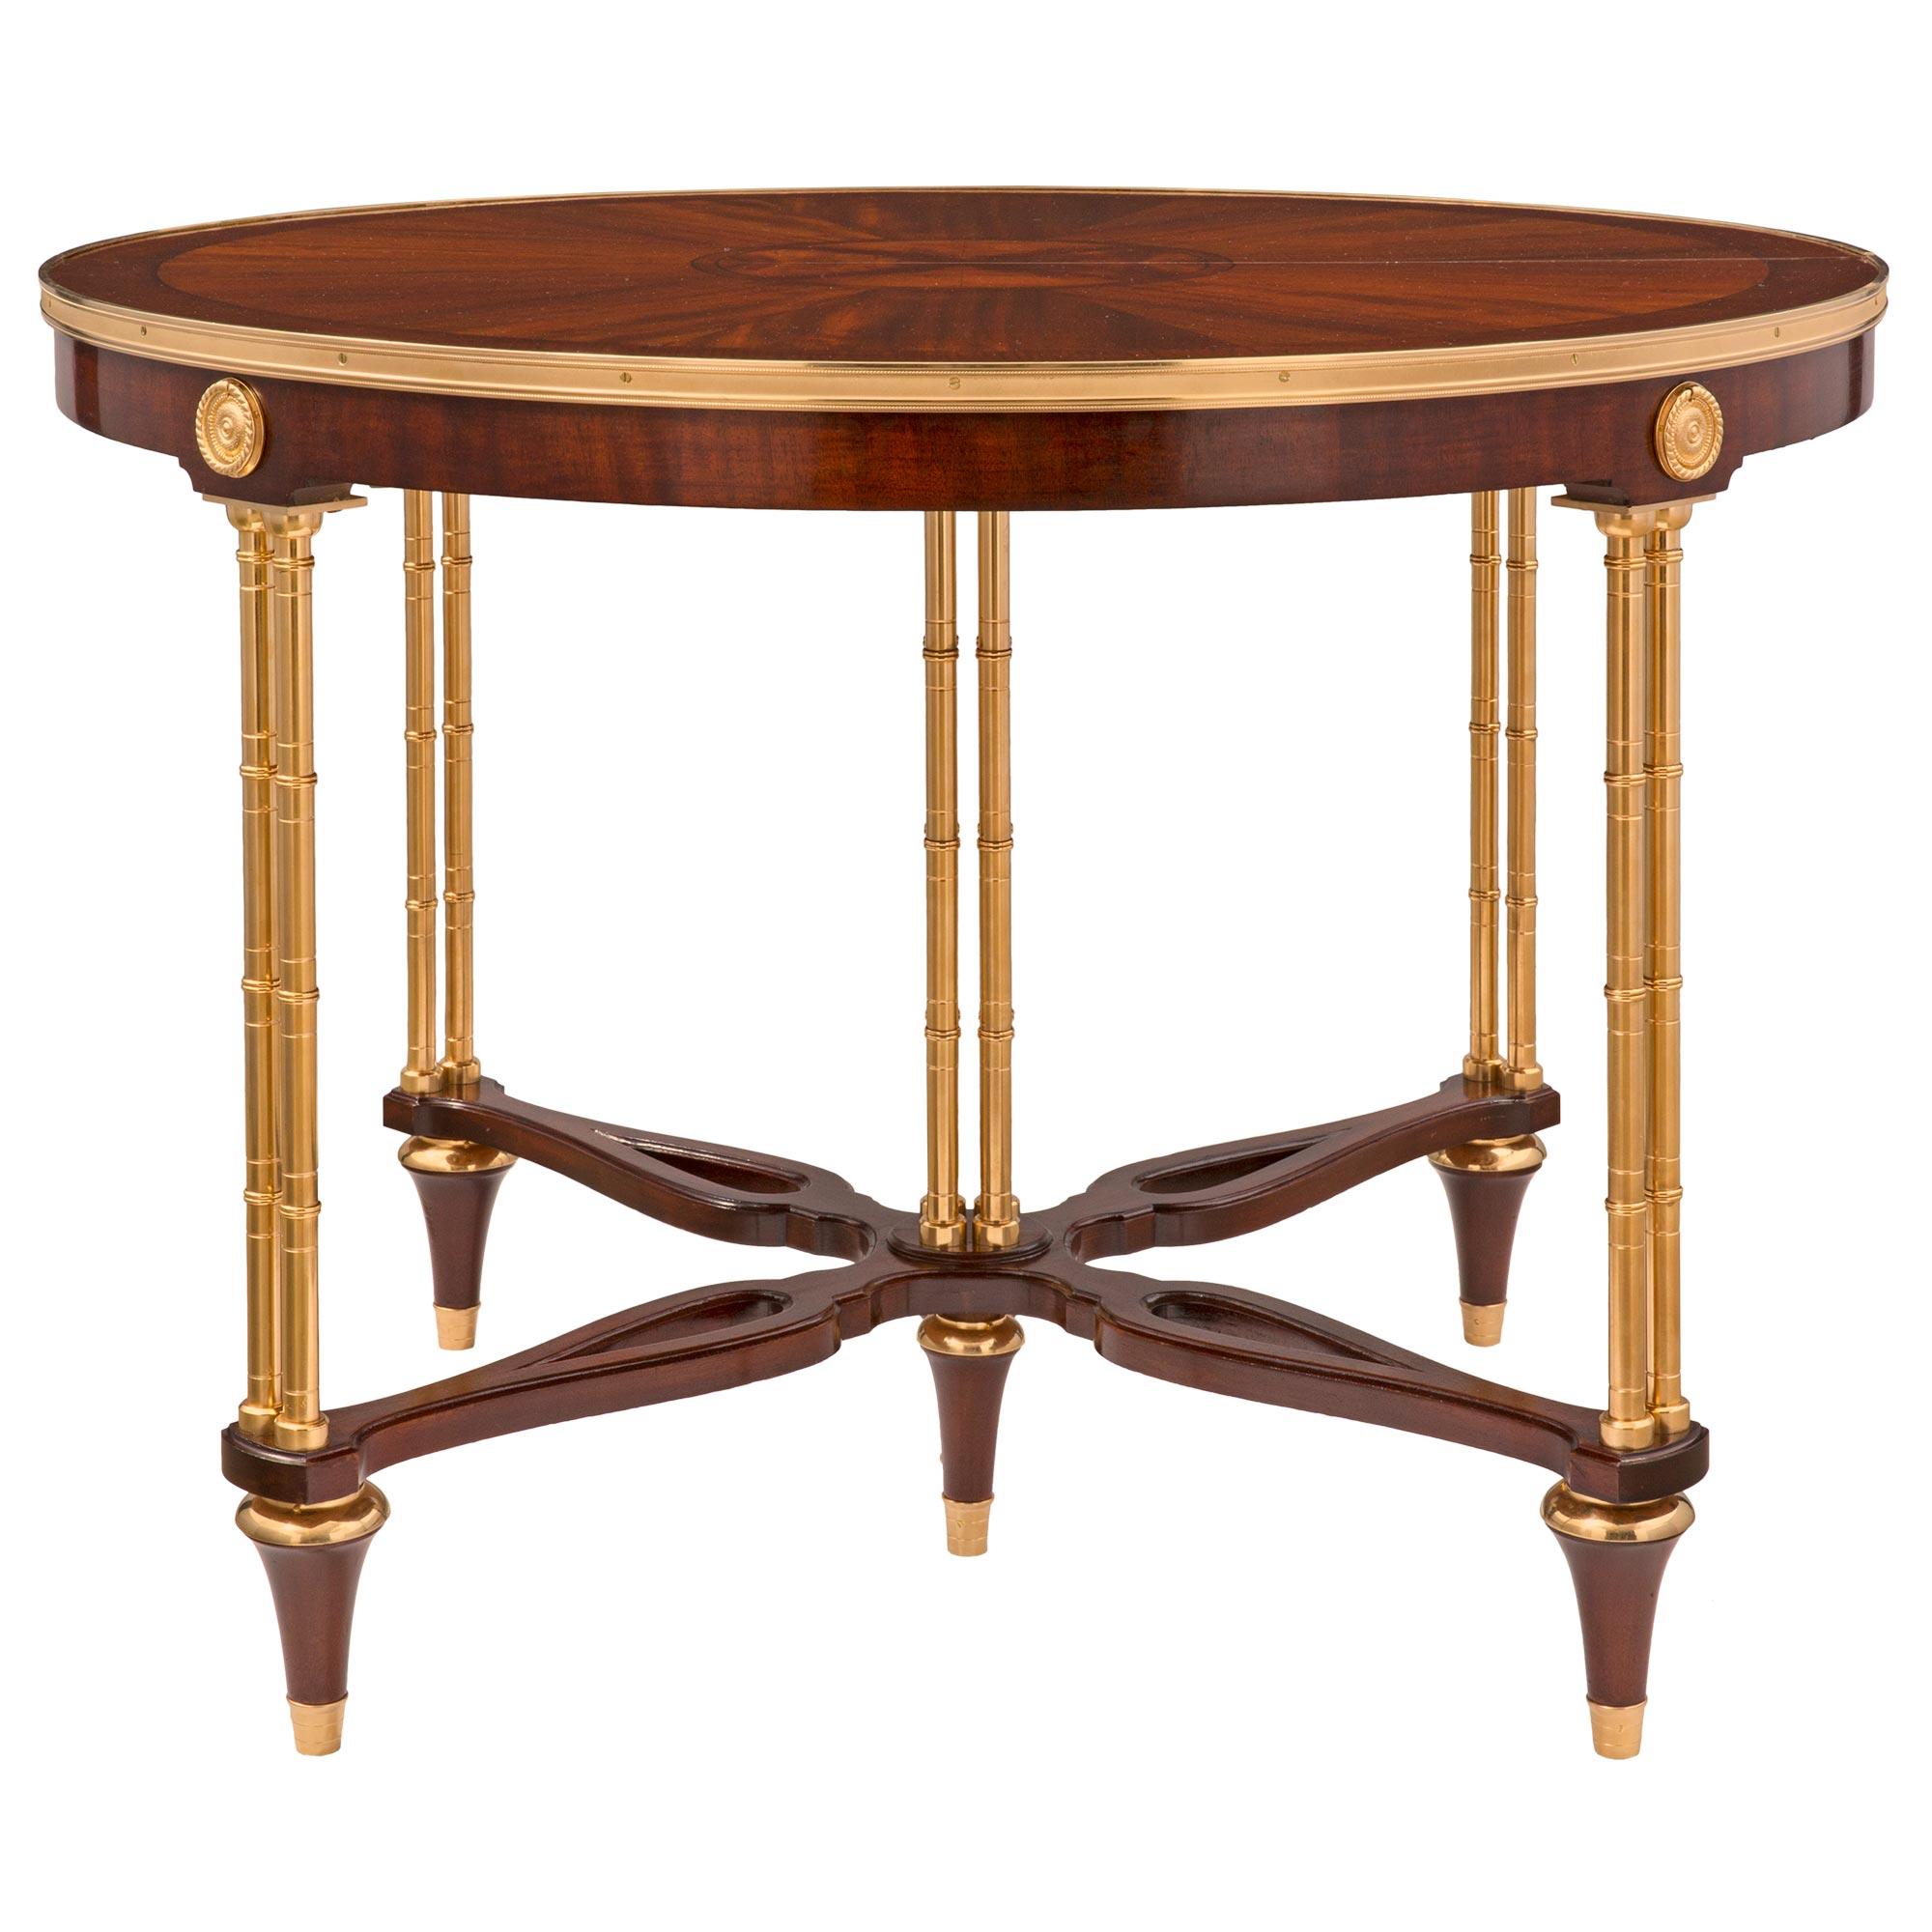 An exceptional and unique French late 19th century Louis XVI st. mahogany and ormolu dining table, after a model by Adam Weisweiler. The table is raised by elegant circular tapered legs with fine topie shaped feet and ormolu top caps. Each leg is